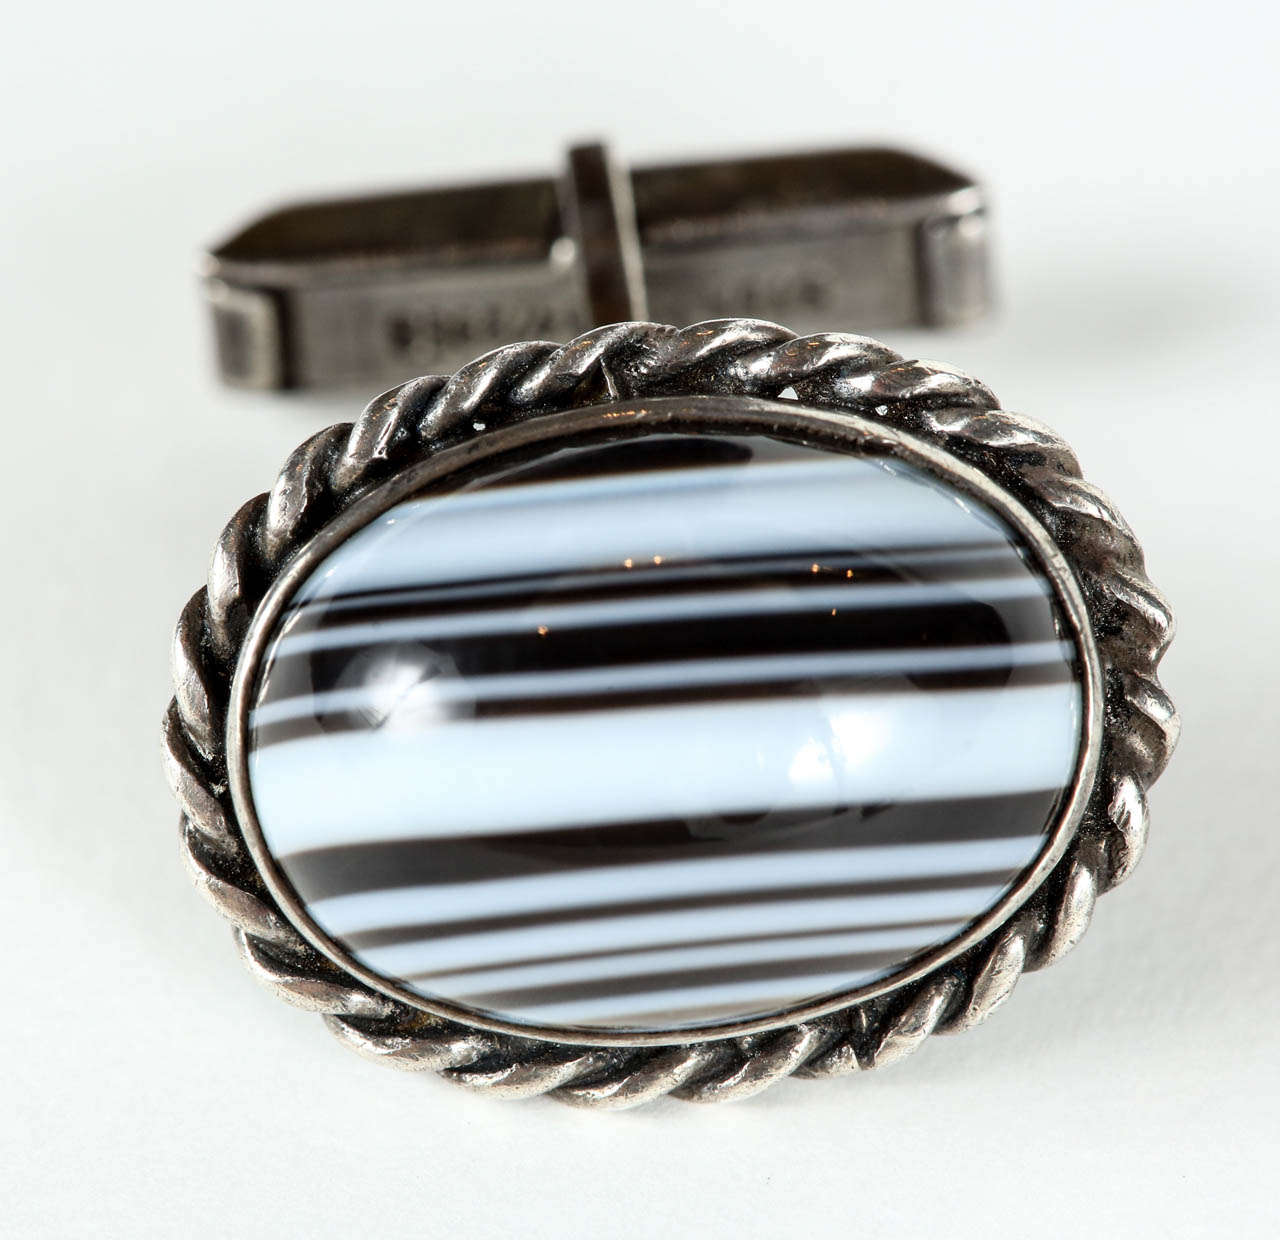 A classic pair of cufflinks with an oval agate cabochon framed within a sterling rope detail. Stamped 